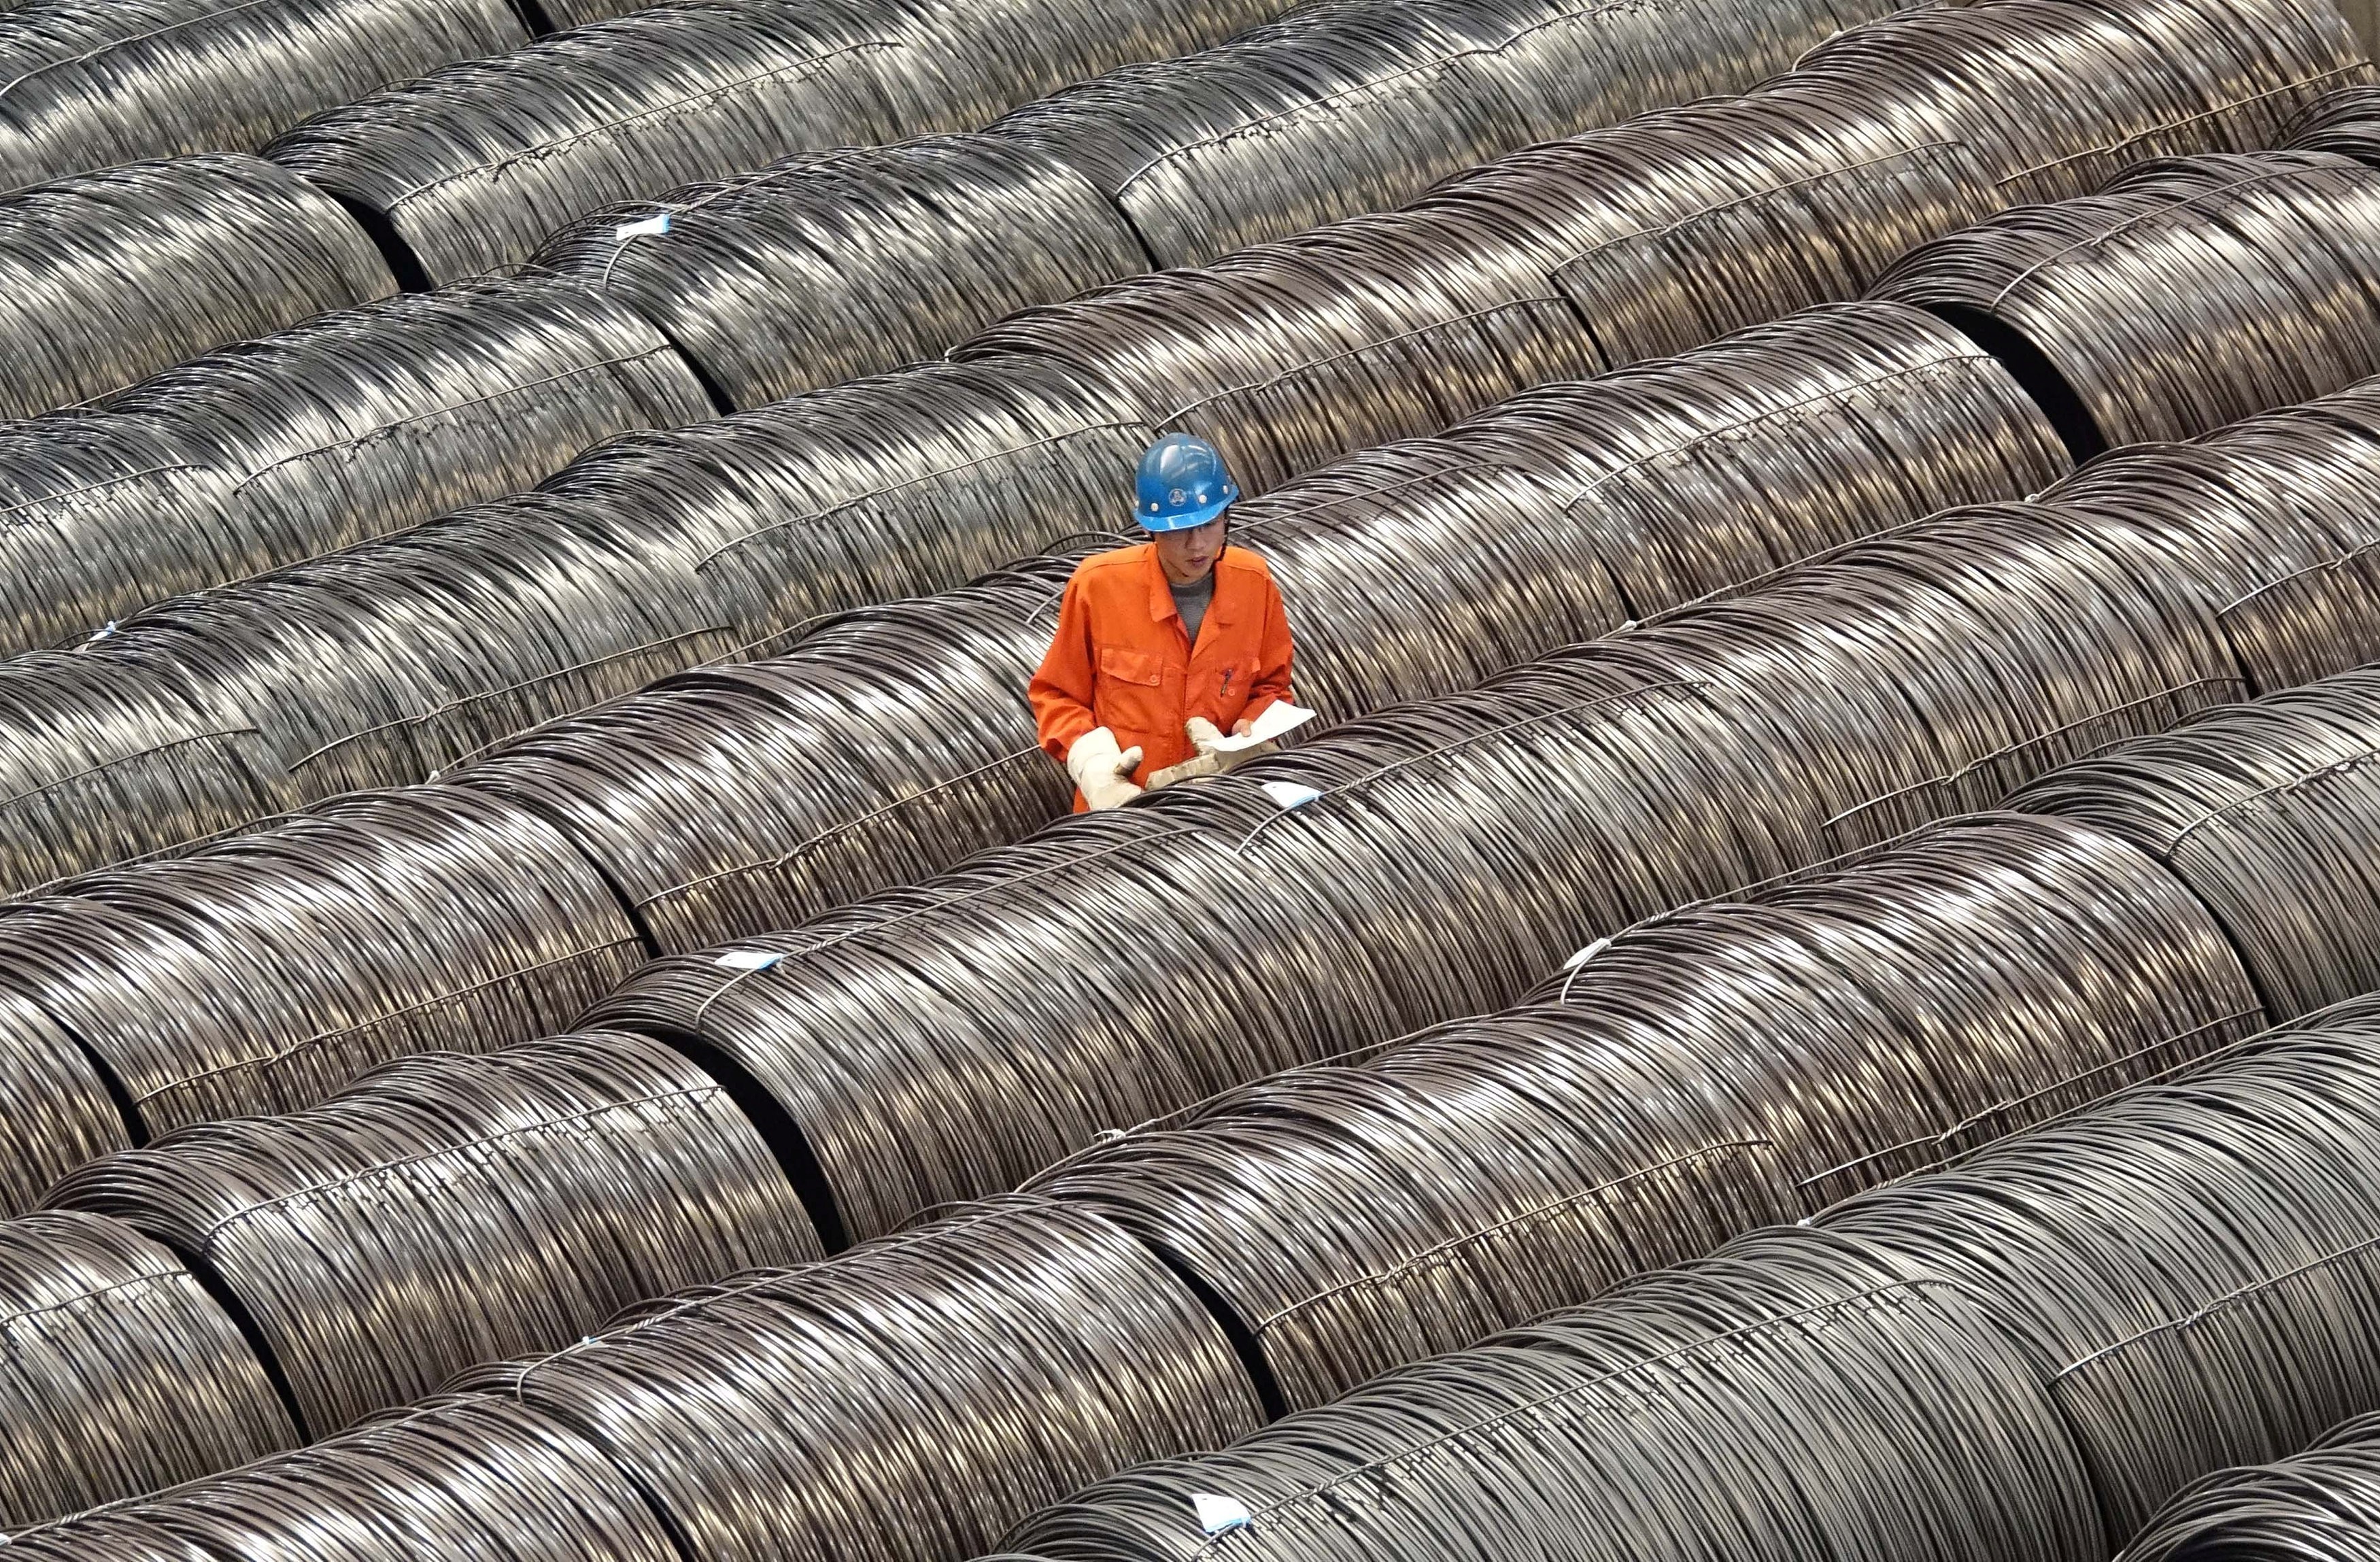 A worker checks steel wires at a warehouse in Dalian, Liaoning province, in May 2017. US President Donald Trump’s plan to impose tariffs on Chinese steel and aluminium has raised fears of a trade war between the two countries. Photo: Reuters